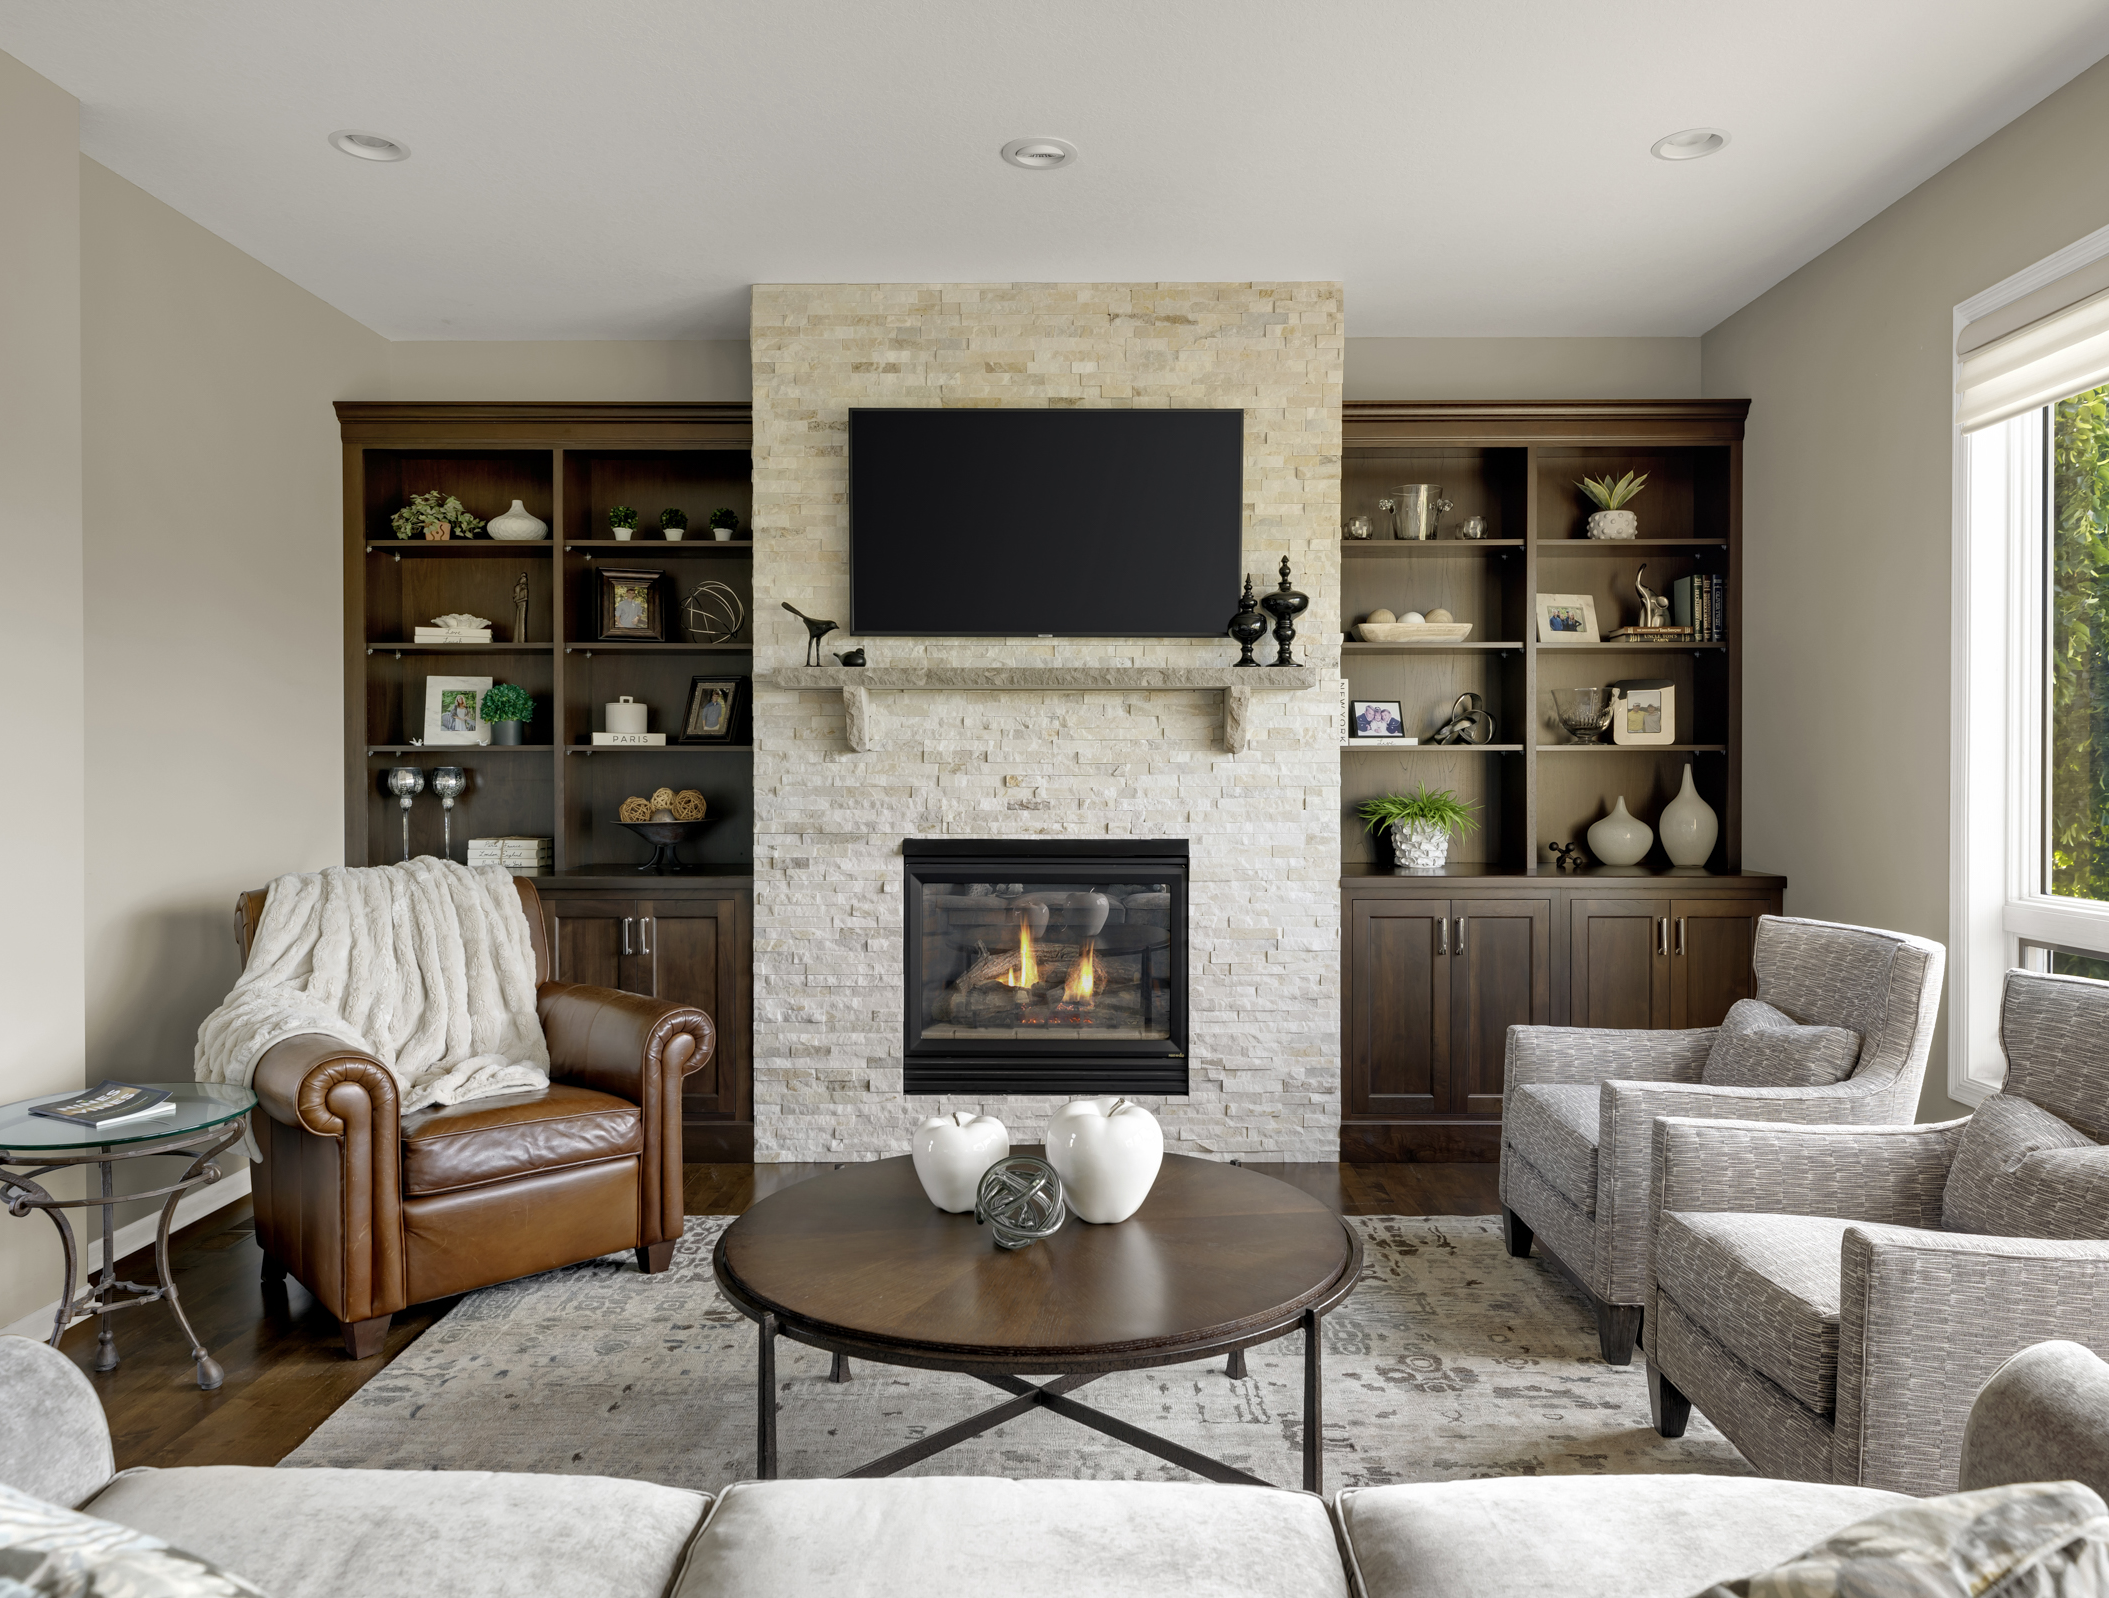 Fireplace remodel with dark wood built ins and stone